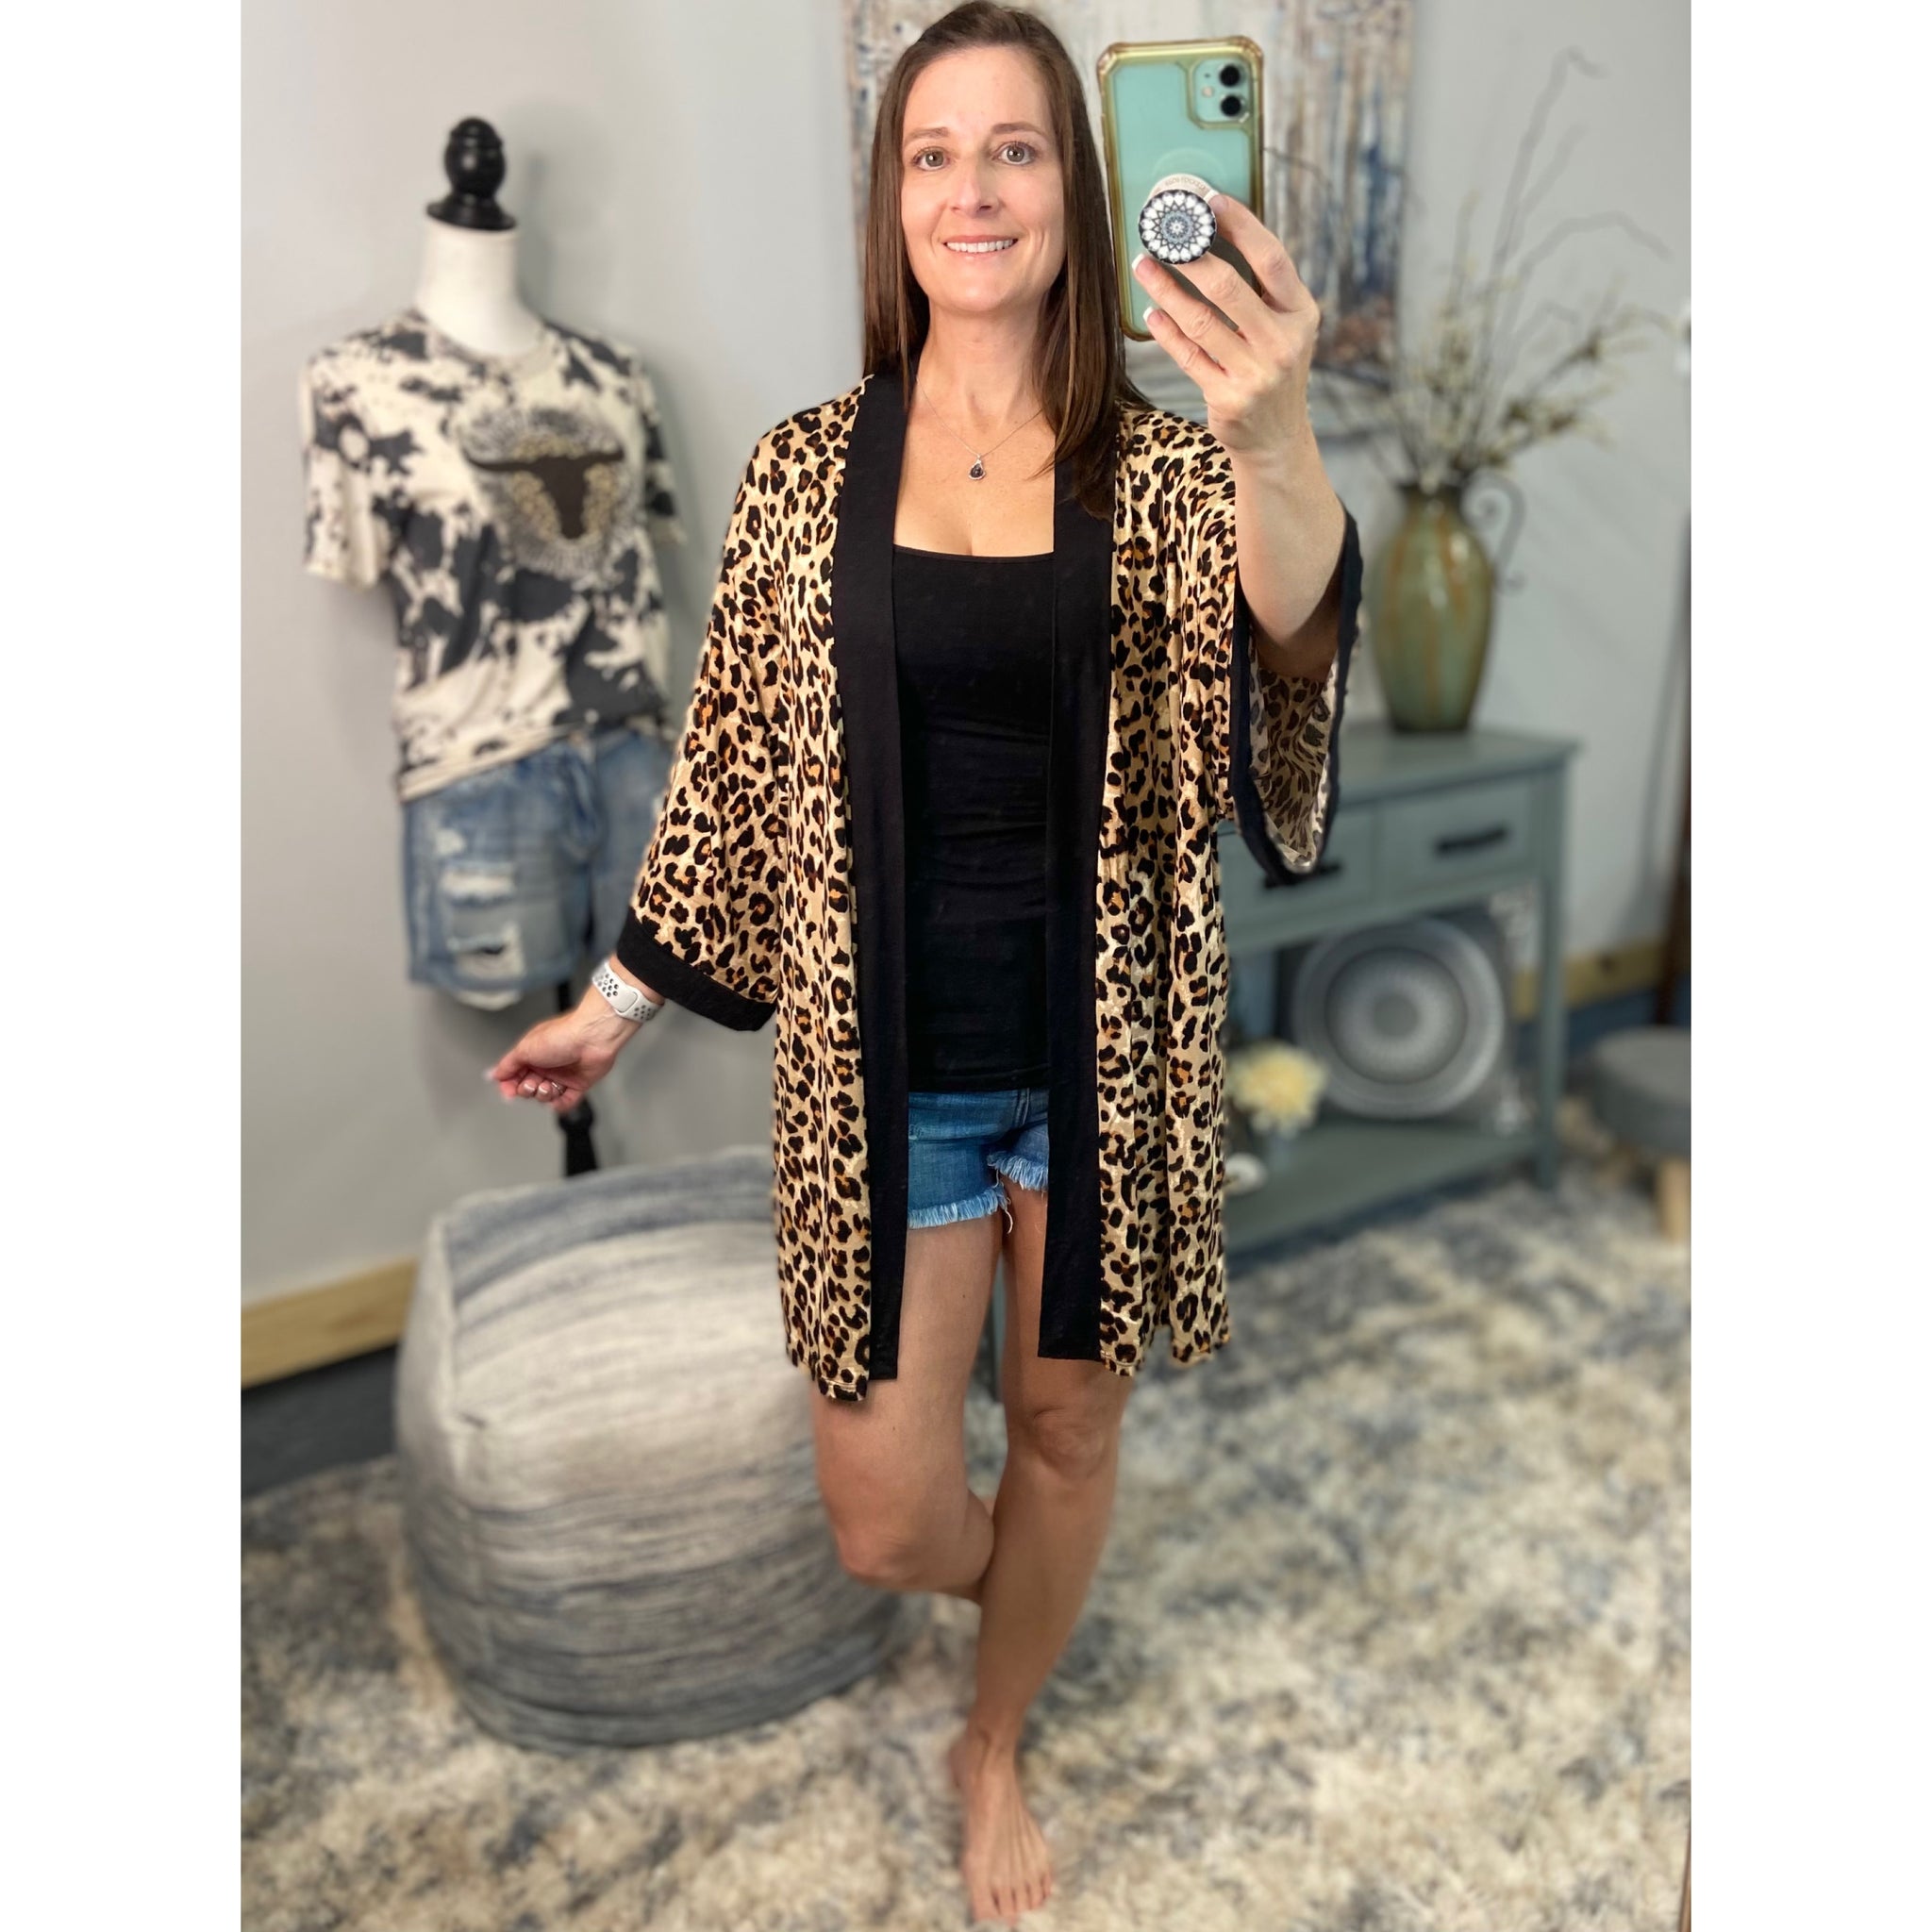 “Express Yourself” Leopard Contrast Trim Long Open Front Kimono Cardigan Pocket Light 3/4 Sleeve Brown S/M/L/XL